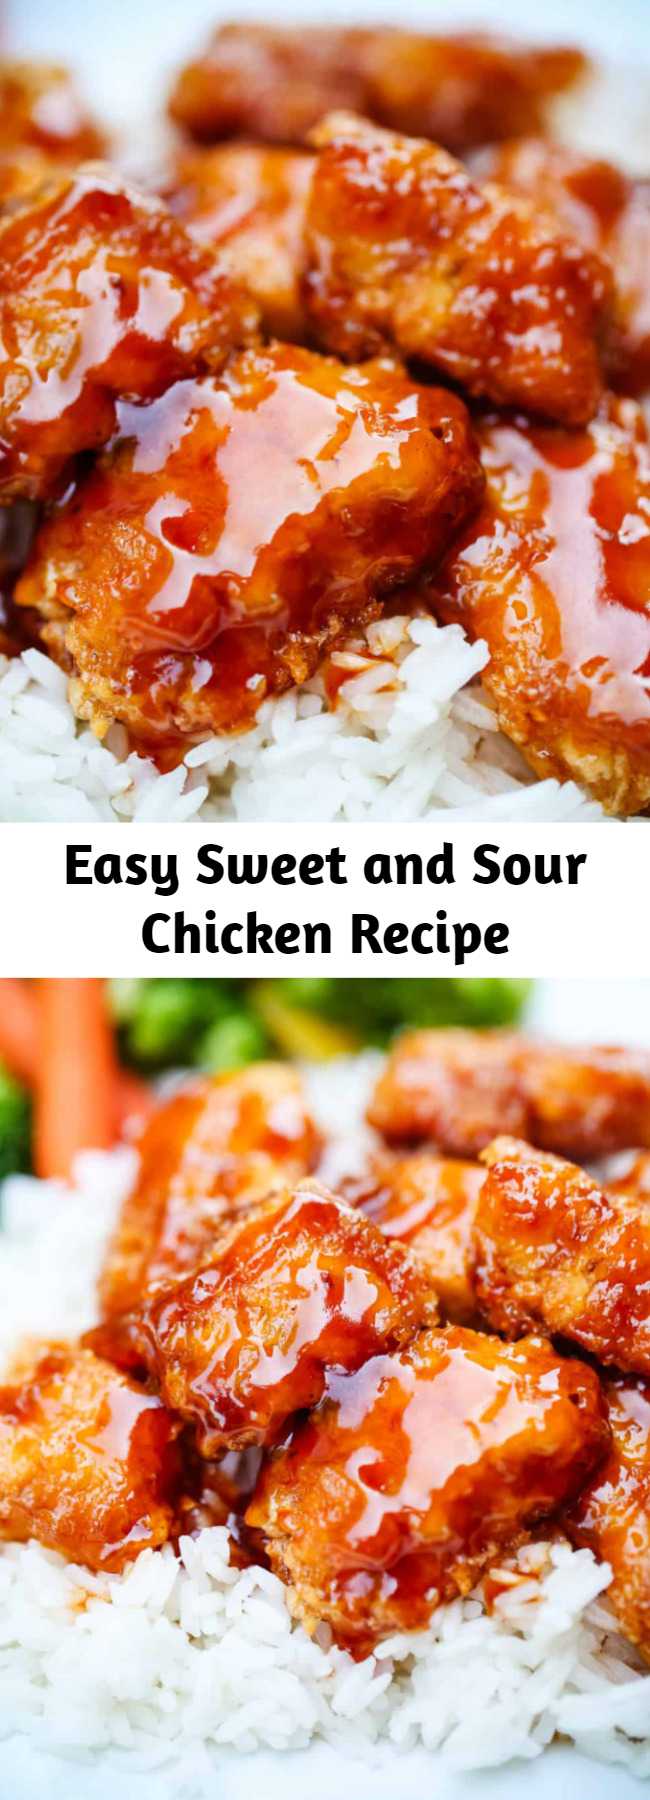 Easy Sweet and Sour Chicken Recipe - Skip the take out and make this delicious sweet and sour chicken recipe at home! The sauce is absolutely to die for. Serve with rice and fresh vegetables for the perfect dinner! #chicken #recipe #sweetandsour #sauce #baked #fried #crispy #chinese